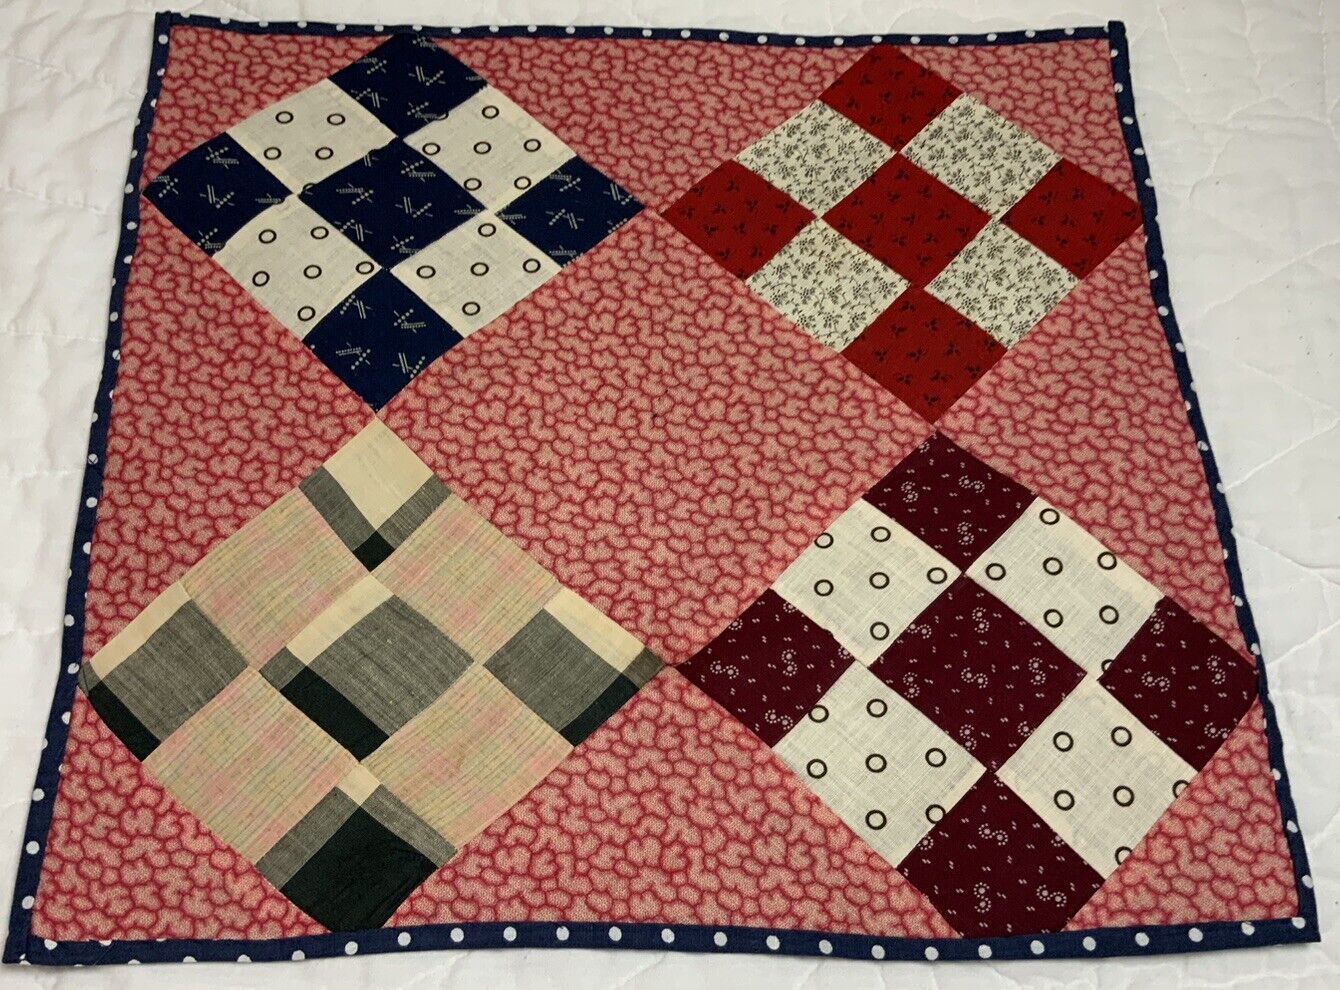 Vintage Antique Patchwork Quilt Table Topper, Square, Nine Patch, Early Calicos